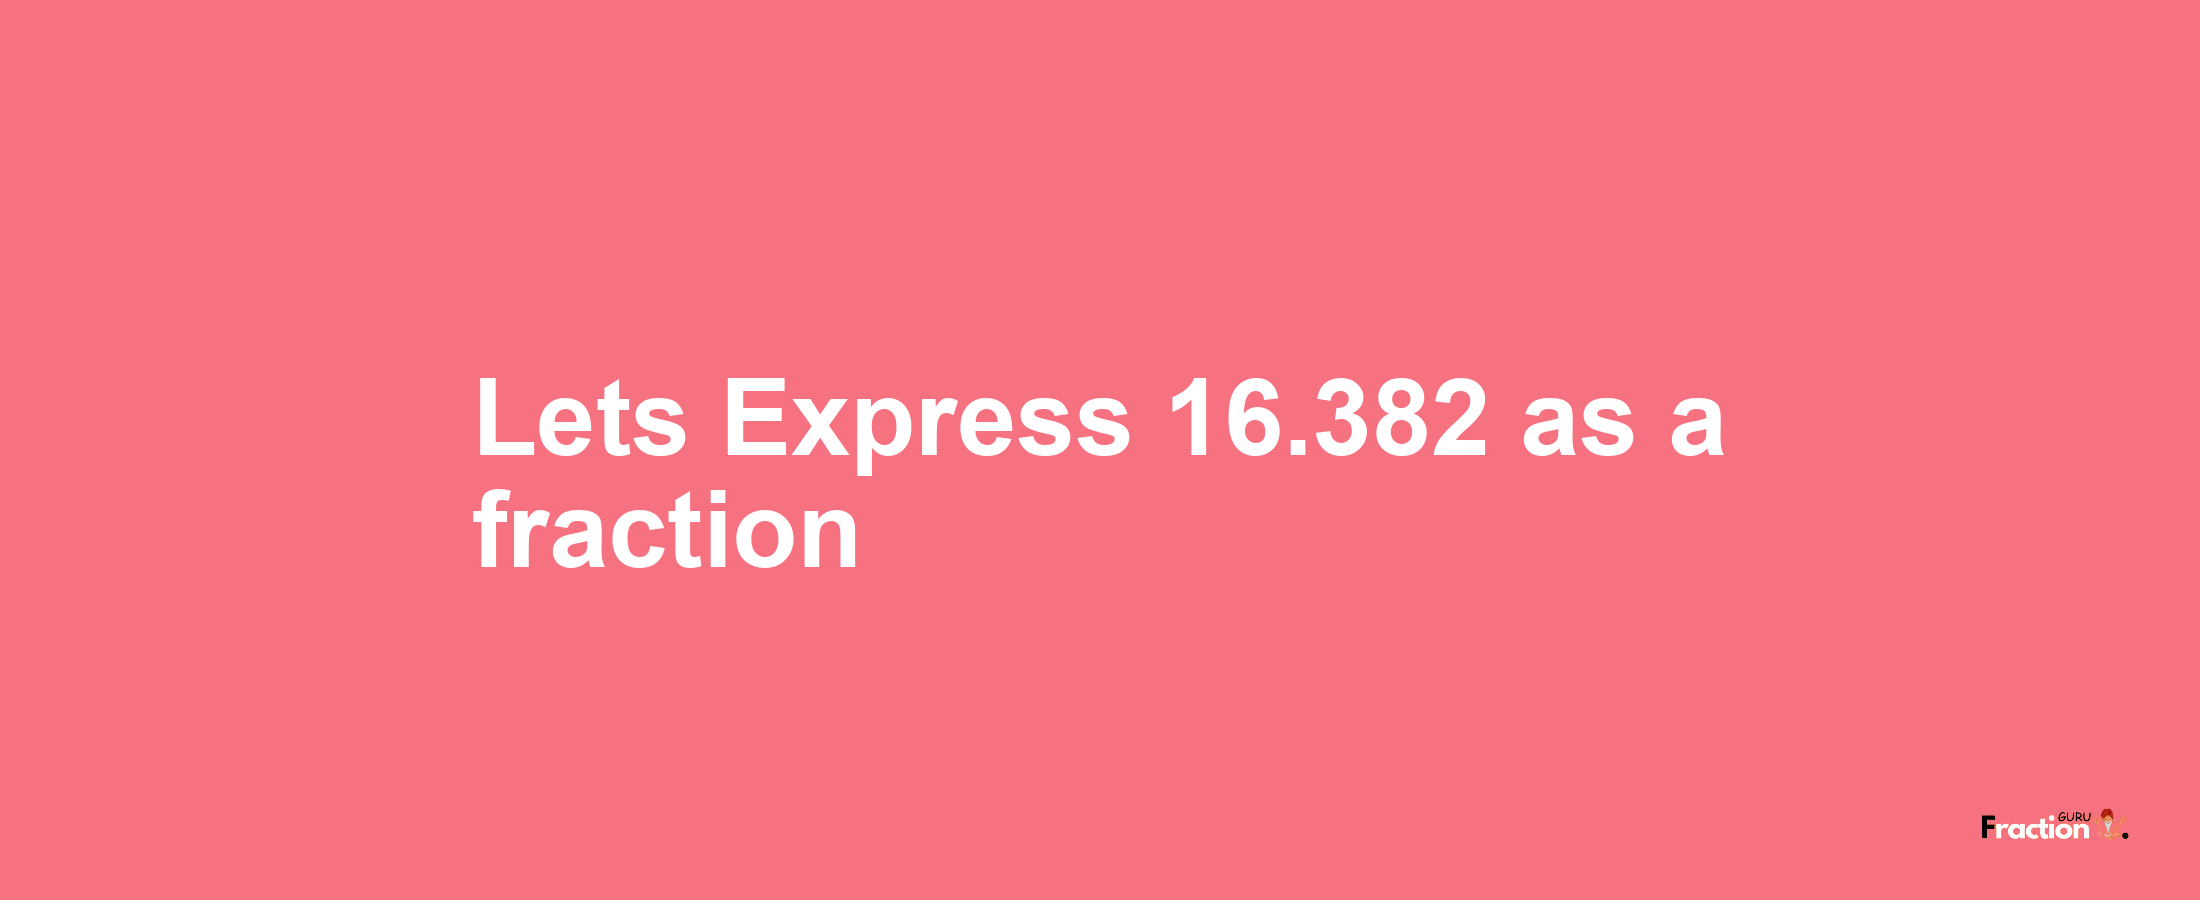 Lets Express 16.382 as afraction